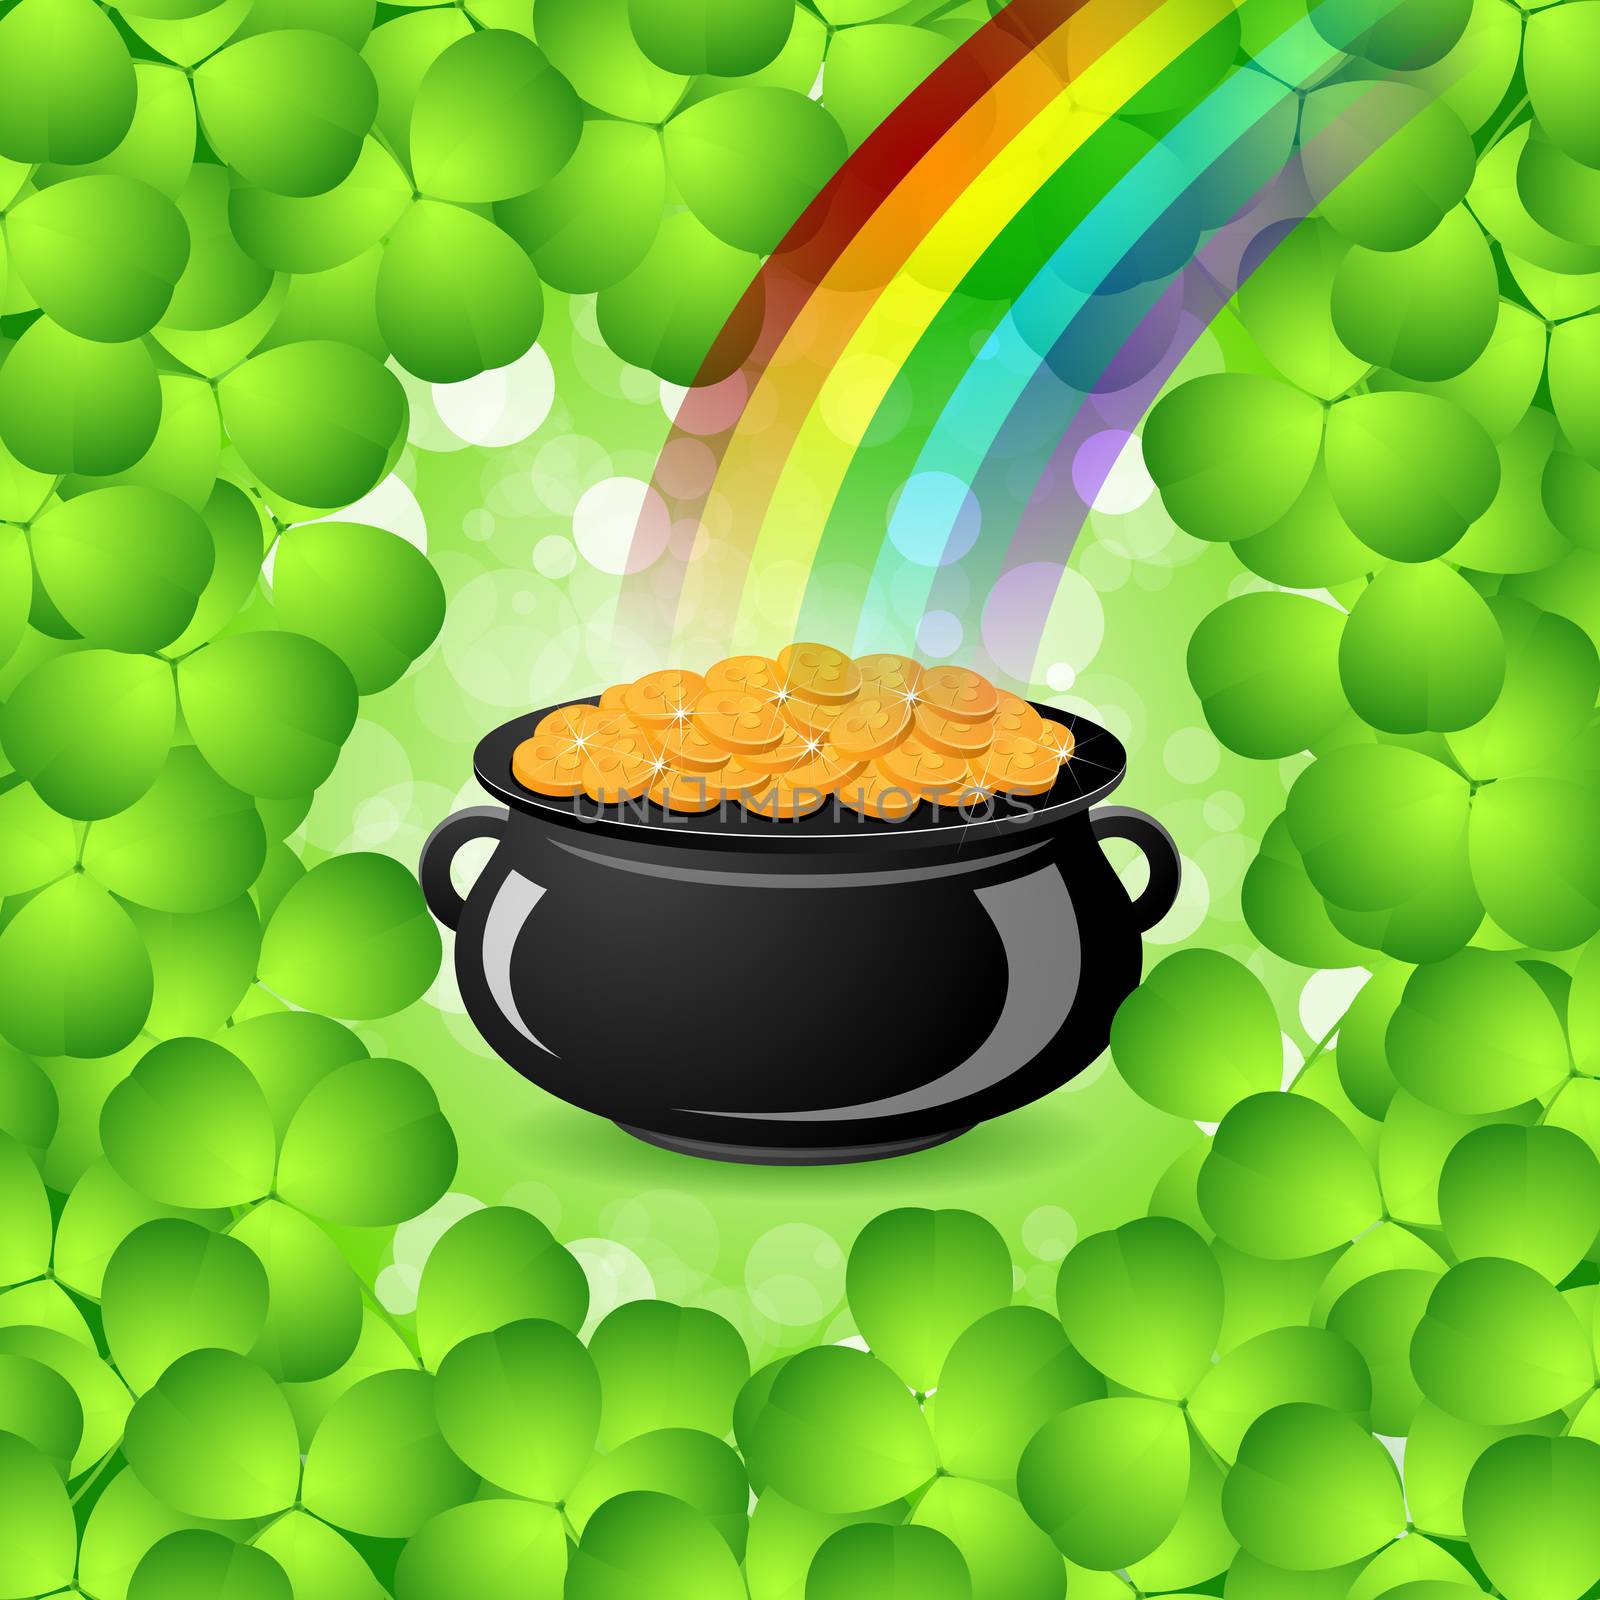 St. Patricks Day Cauldron with Gold Coins, Rainbow and Shamrock